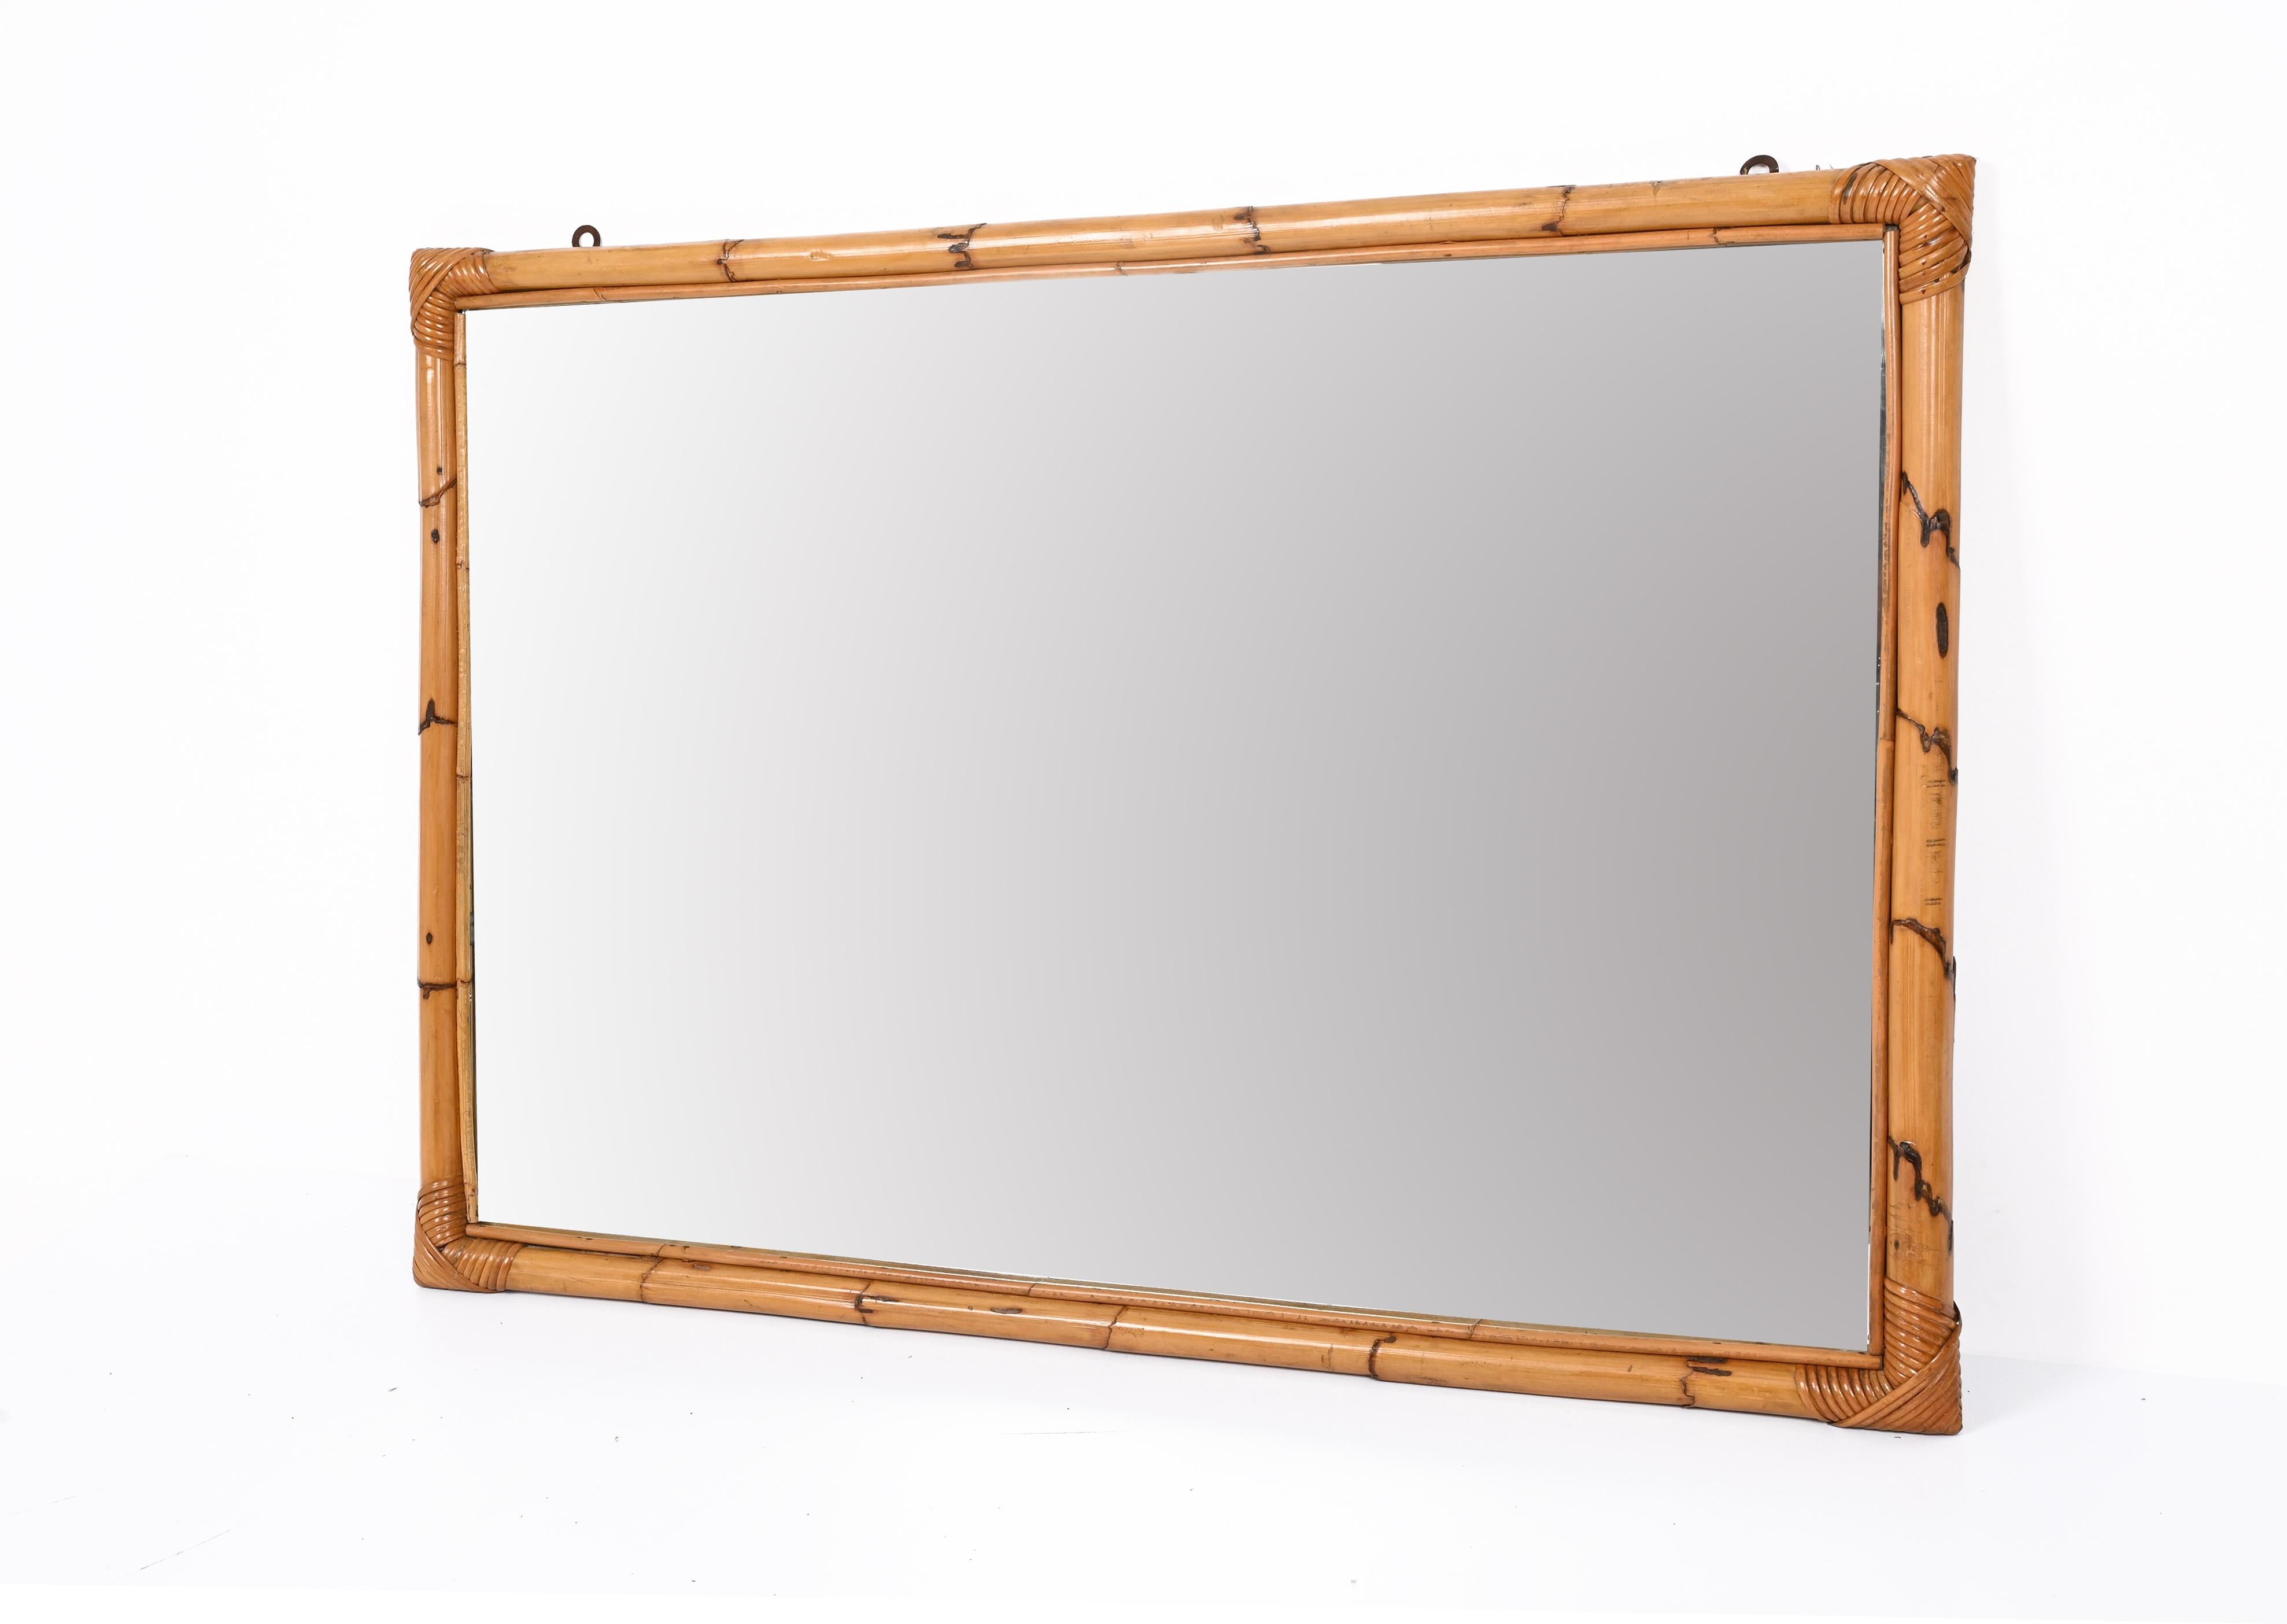 Midcentury Large Rectangular Italian Mirror with Double Bamboo Cane Frame, 1970s For Sale 8